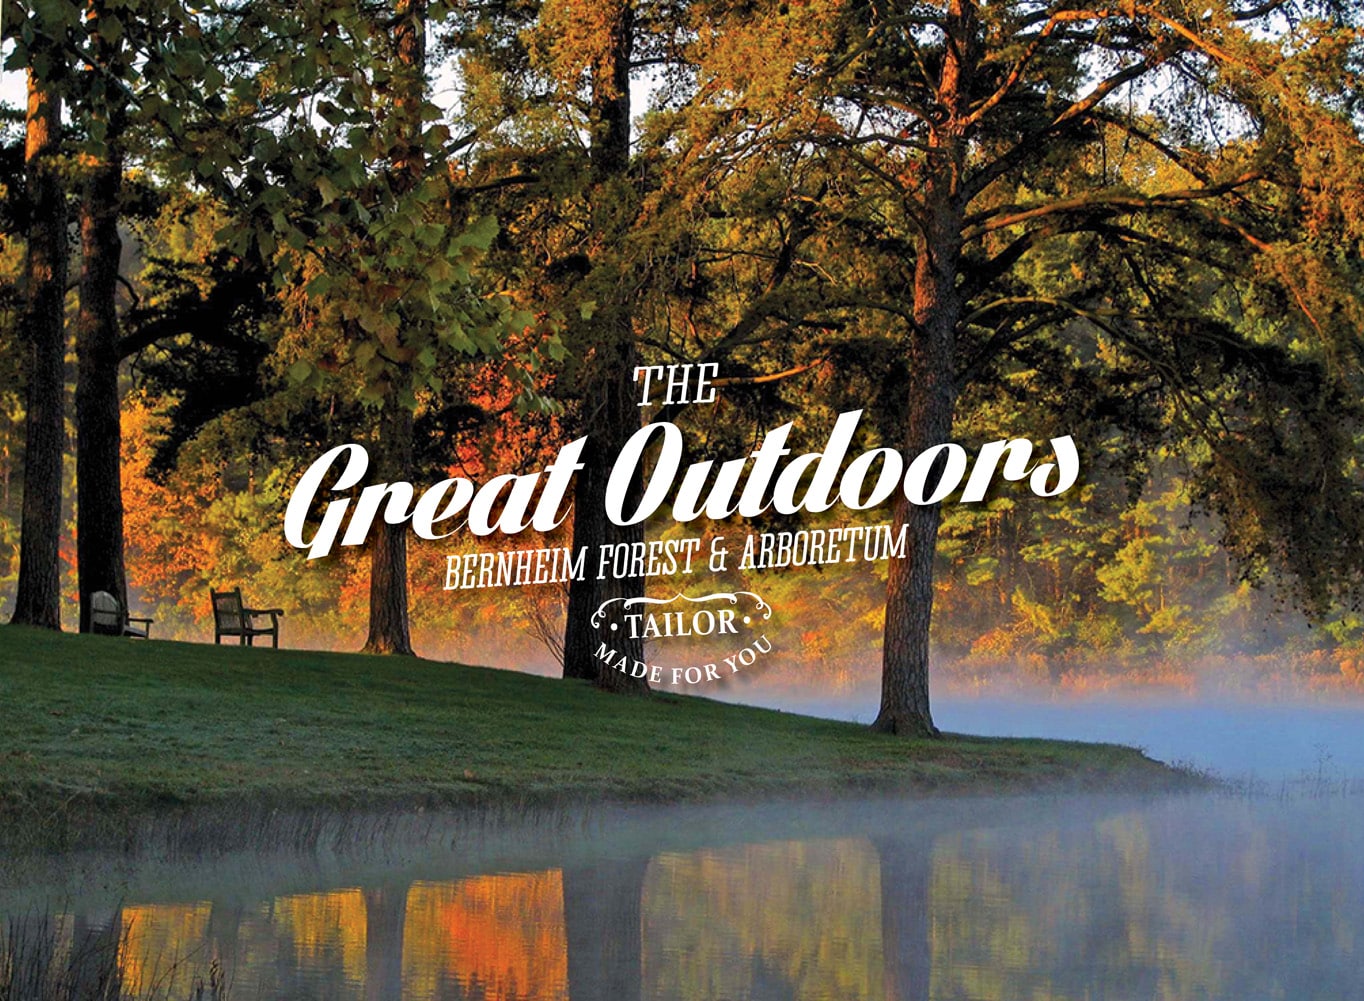 website banner showcasing The Great Outdoors